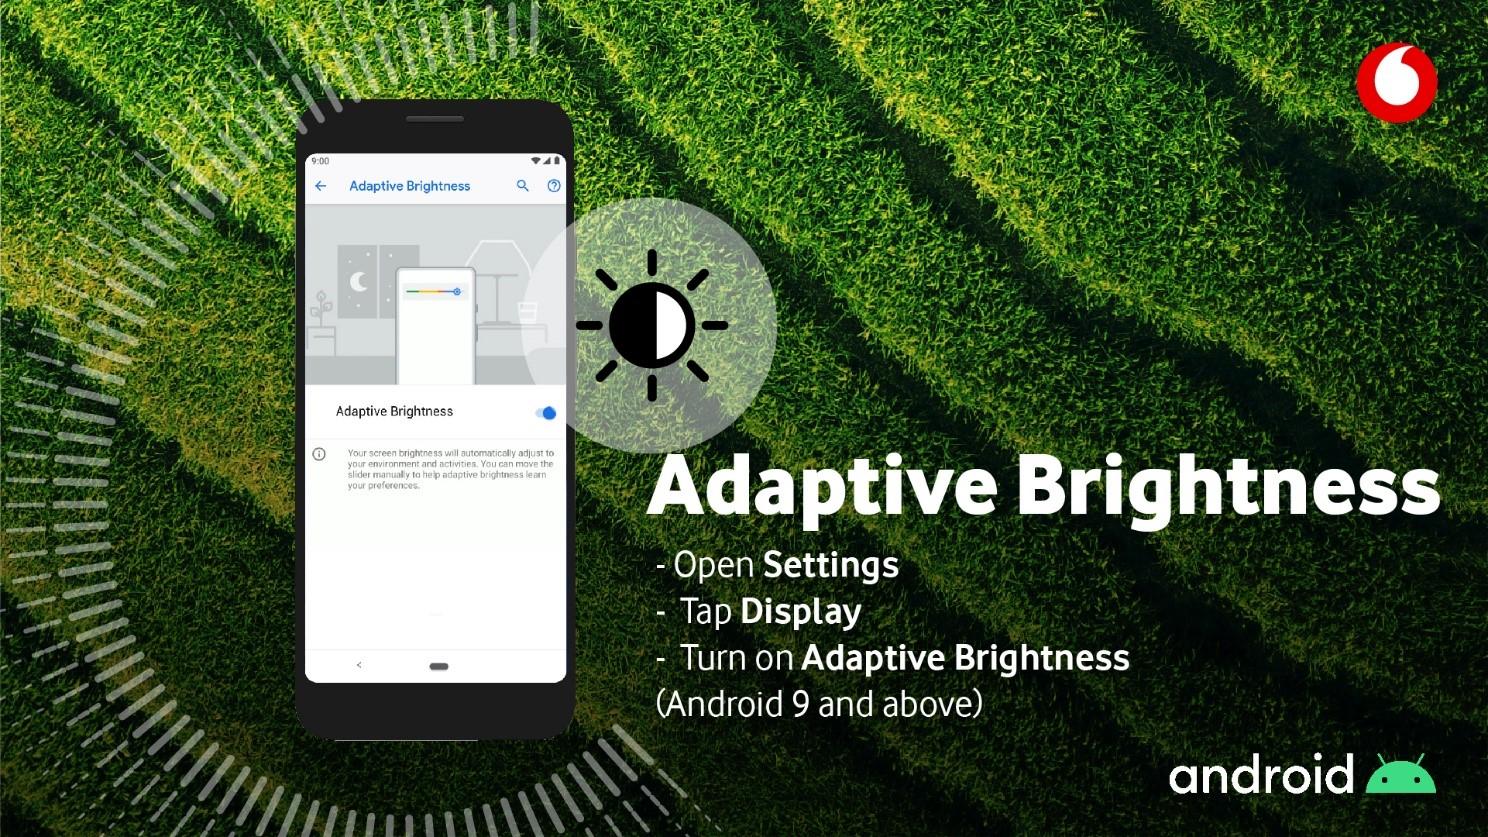 Information about adaptive brightness with Android.